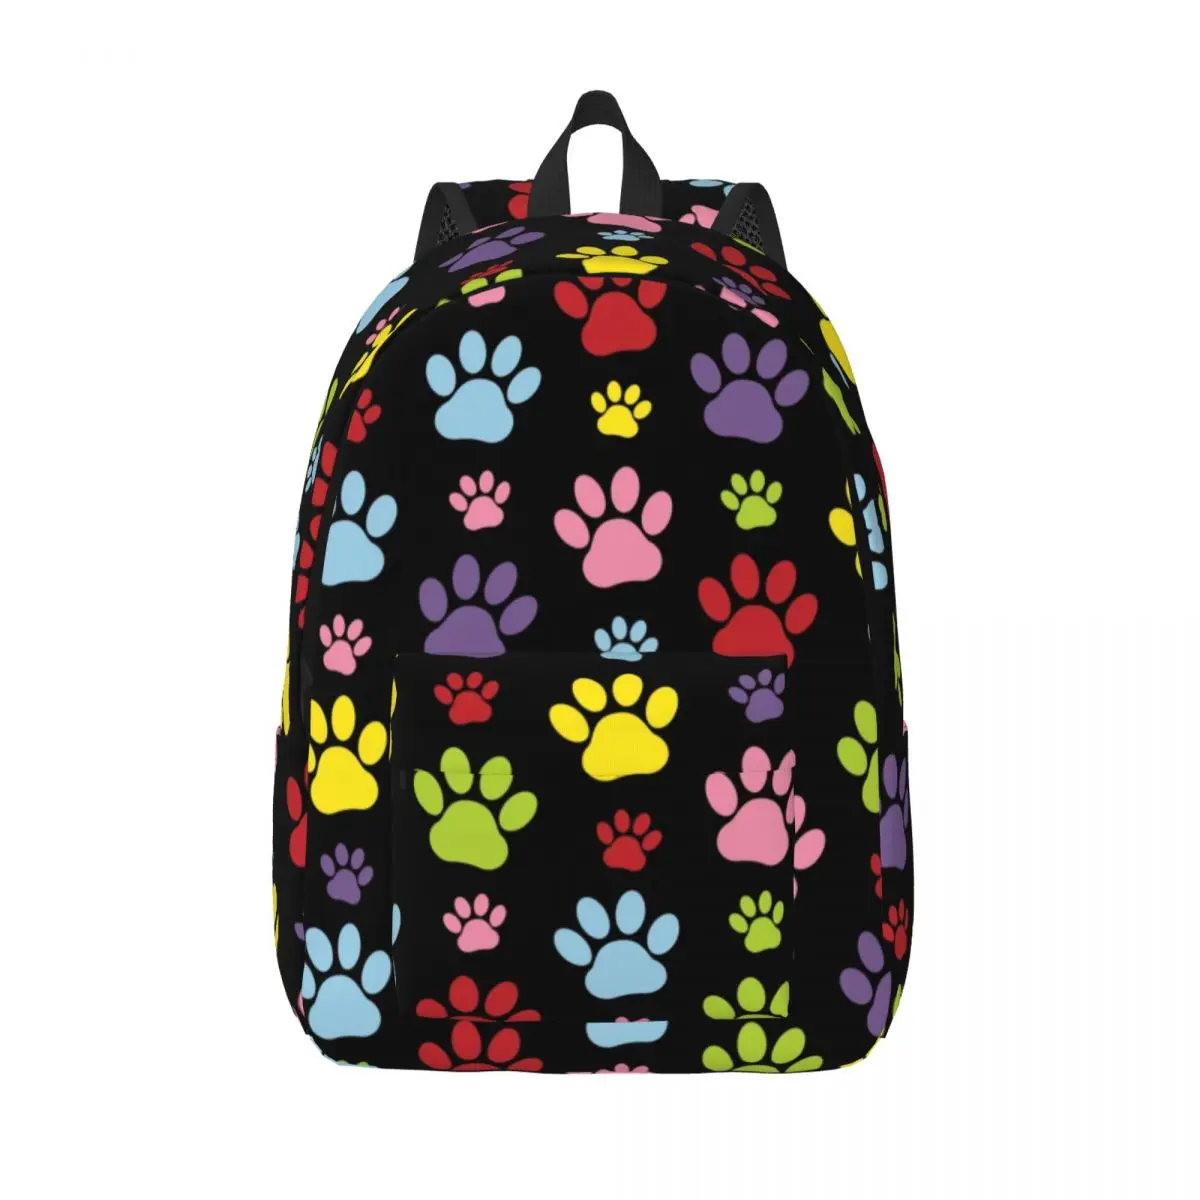 

Colorful Paws Pattern Canvas Backpack for Women Men College School Students Bookbag Fits 15 Inch Laptop Dog Paw Prints Pet Bags